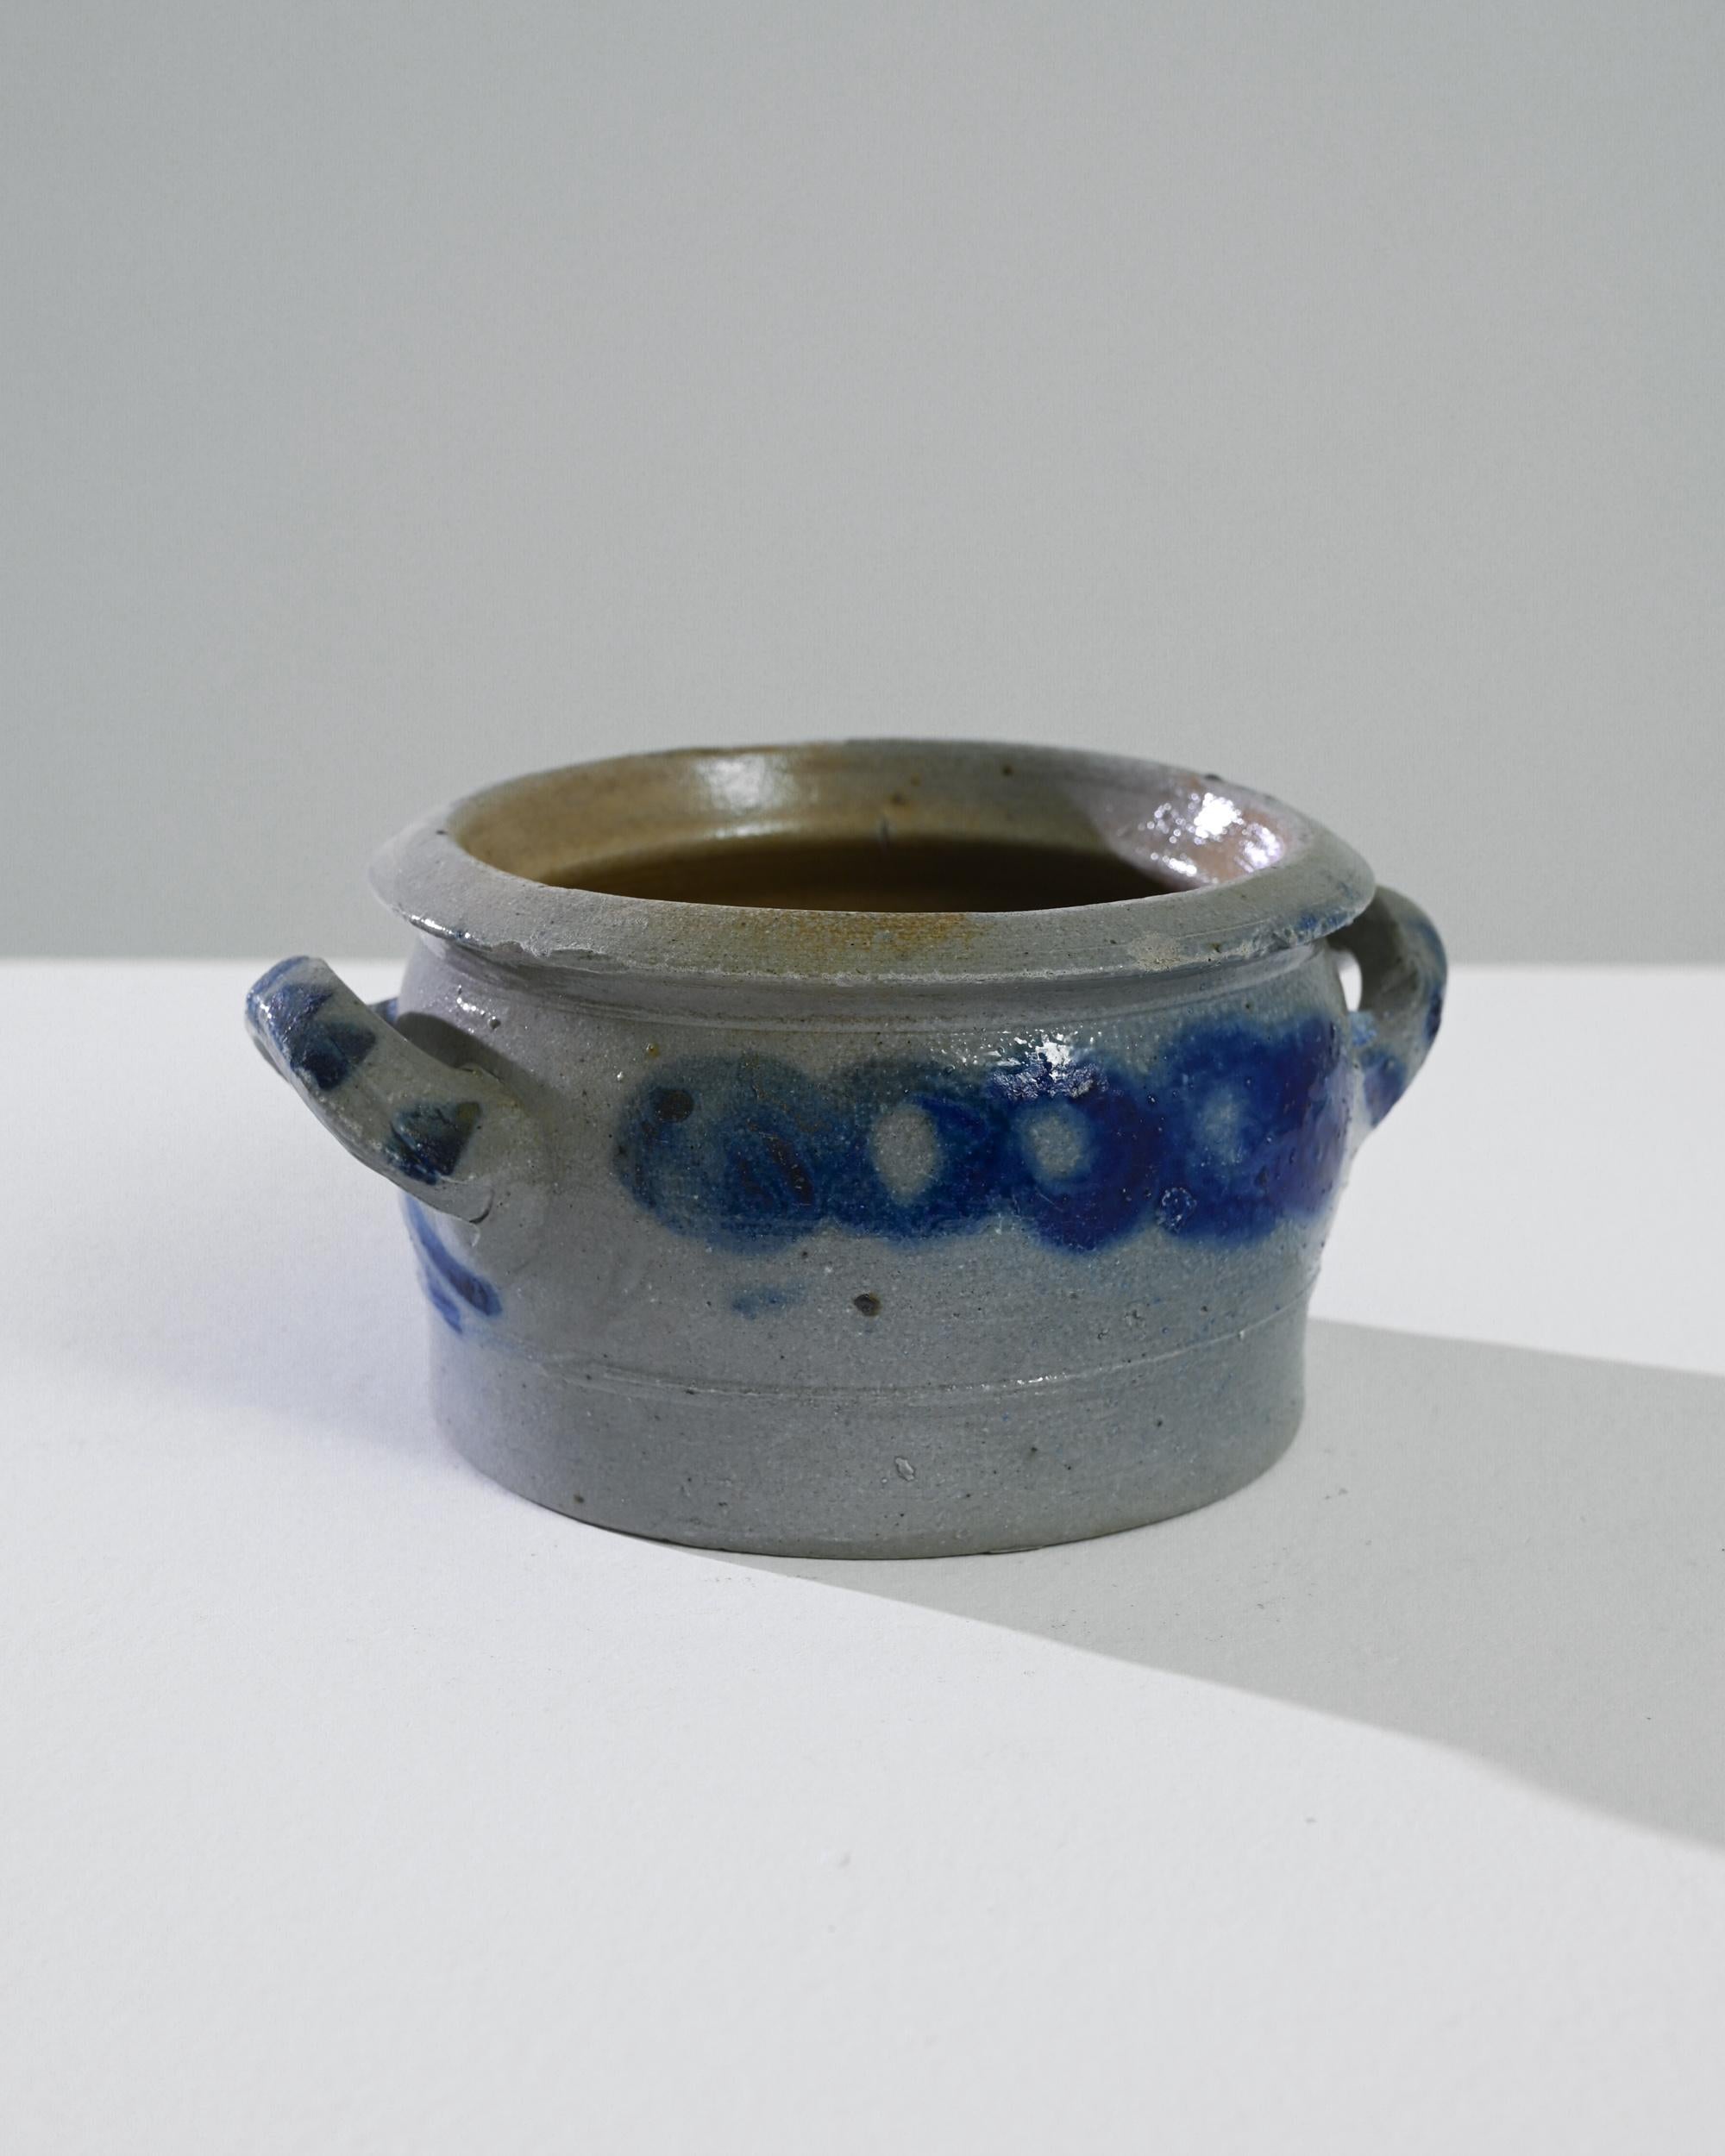 This 1900s Belgian ceramic pot is a quaint and charming piece that adds a touch of vintage European elegance to any home. Its sturdy earthenware construction and unique blue speckled glaze make it a delightful accent for your kitchen or living